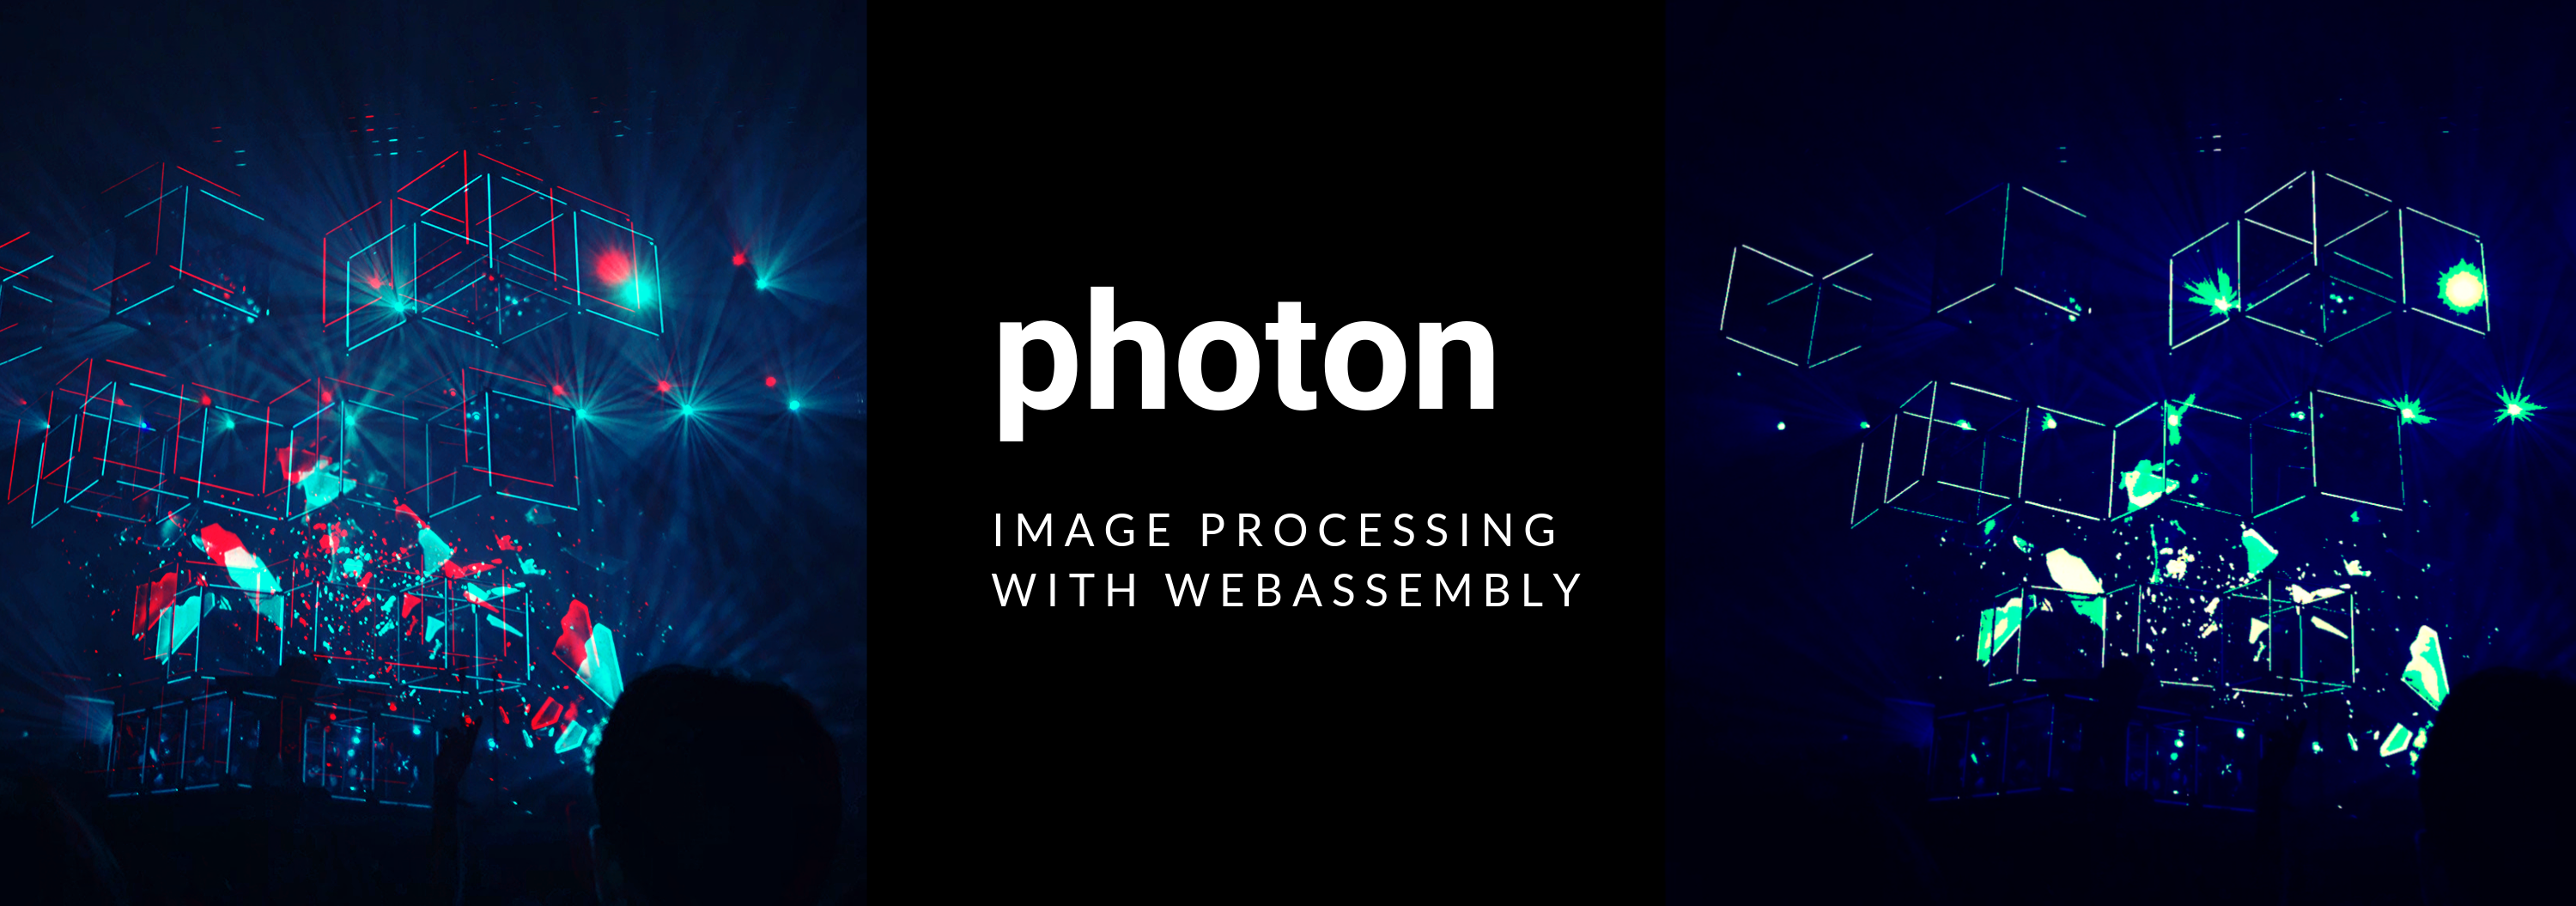 Photon banner, showing the Photon logo on a dark background